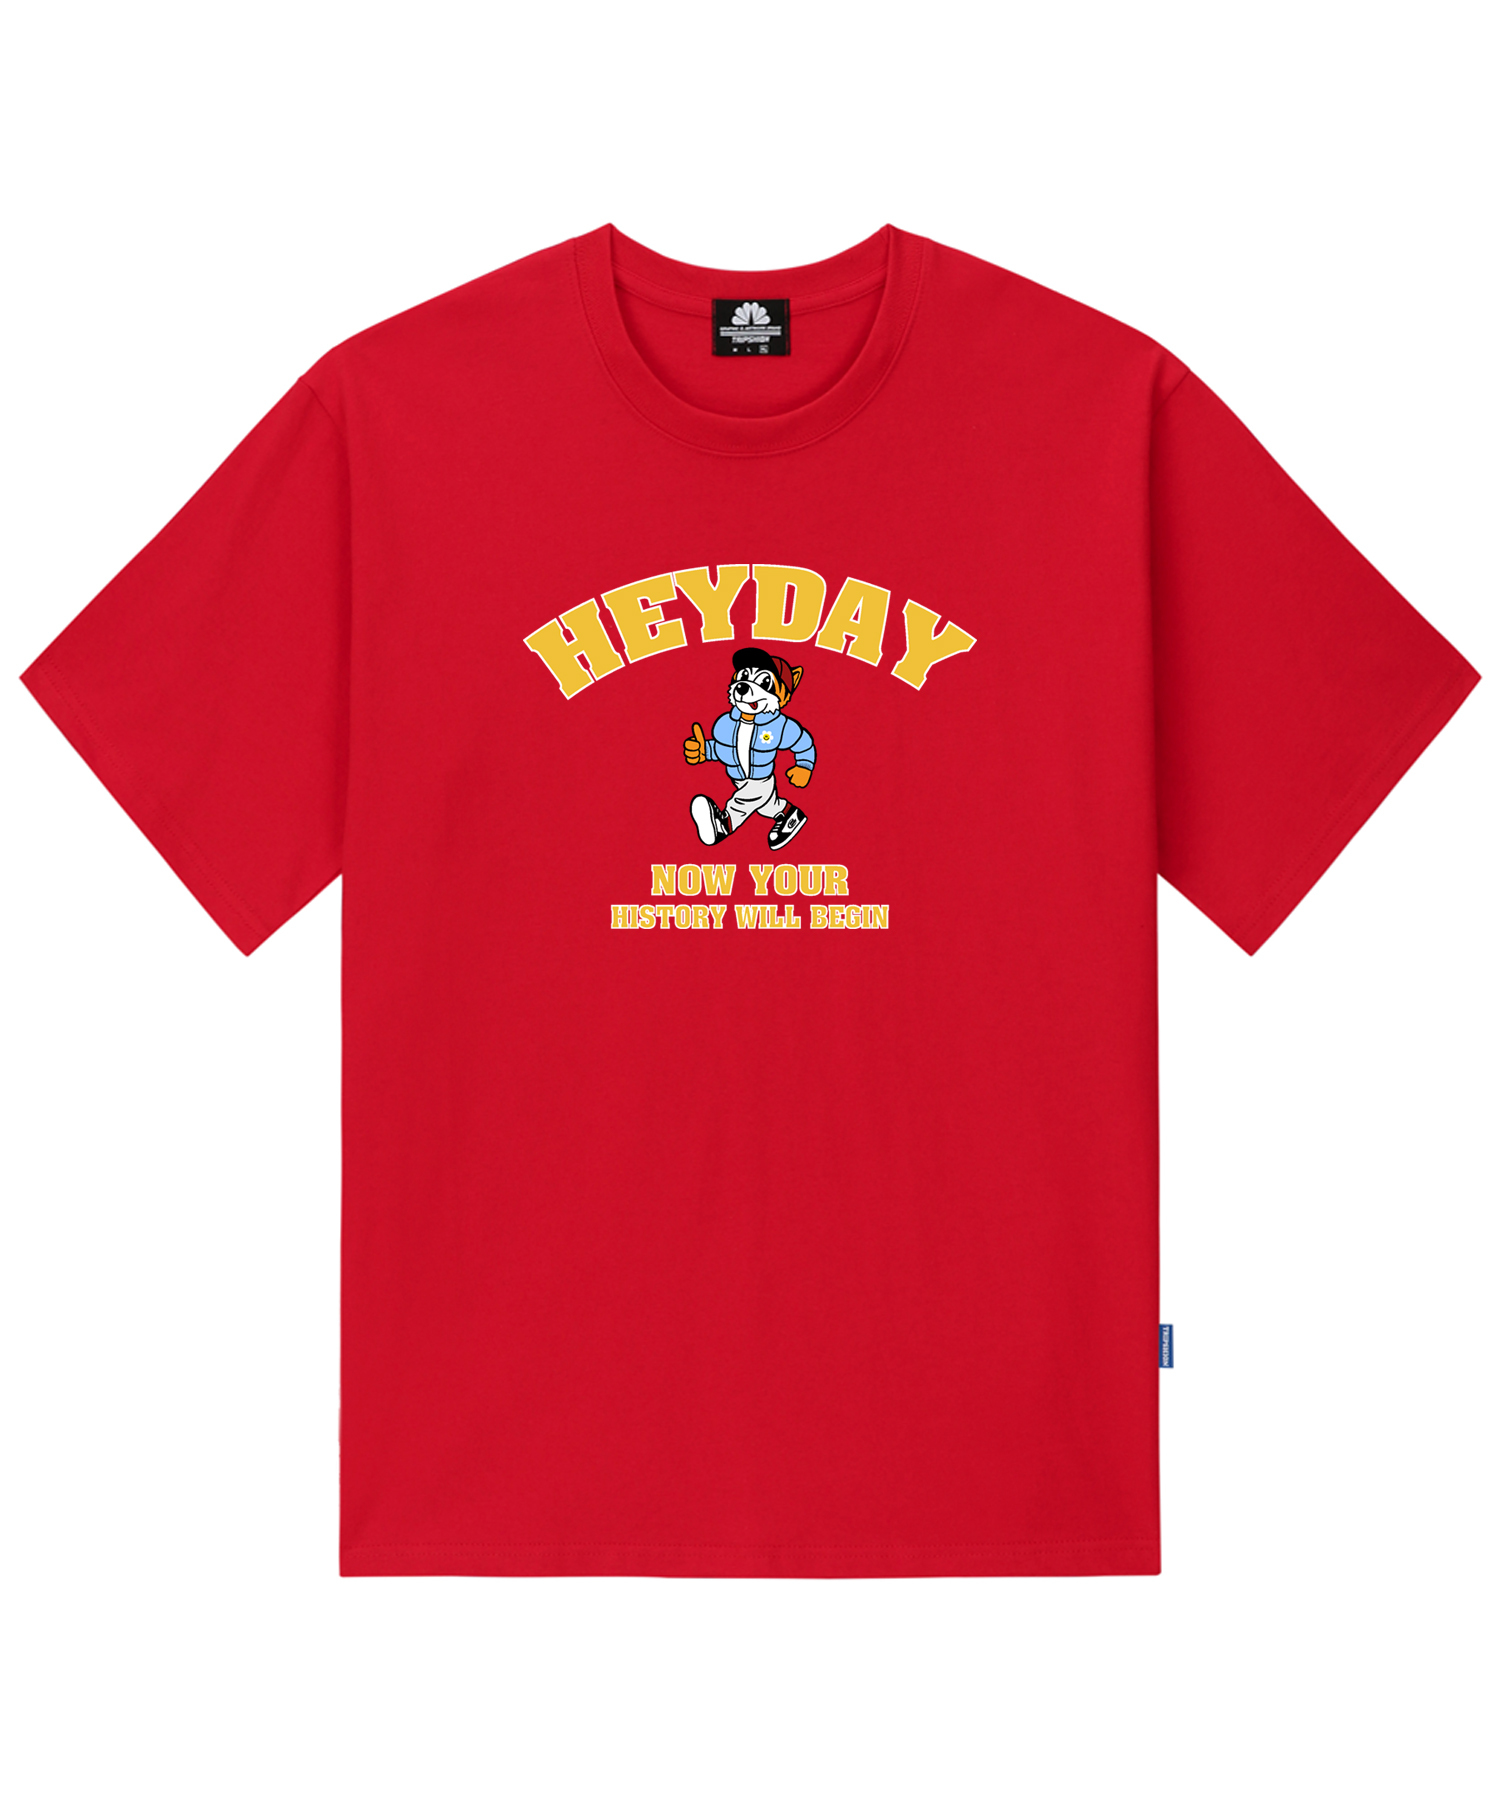 HEYDAY TIGER GRAPHIC T-SHIRTS - RED